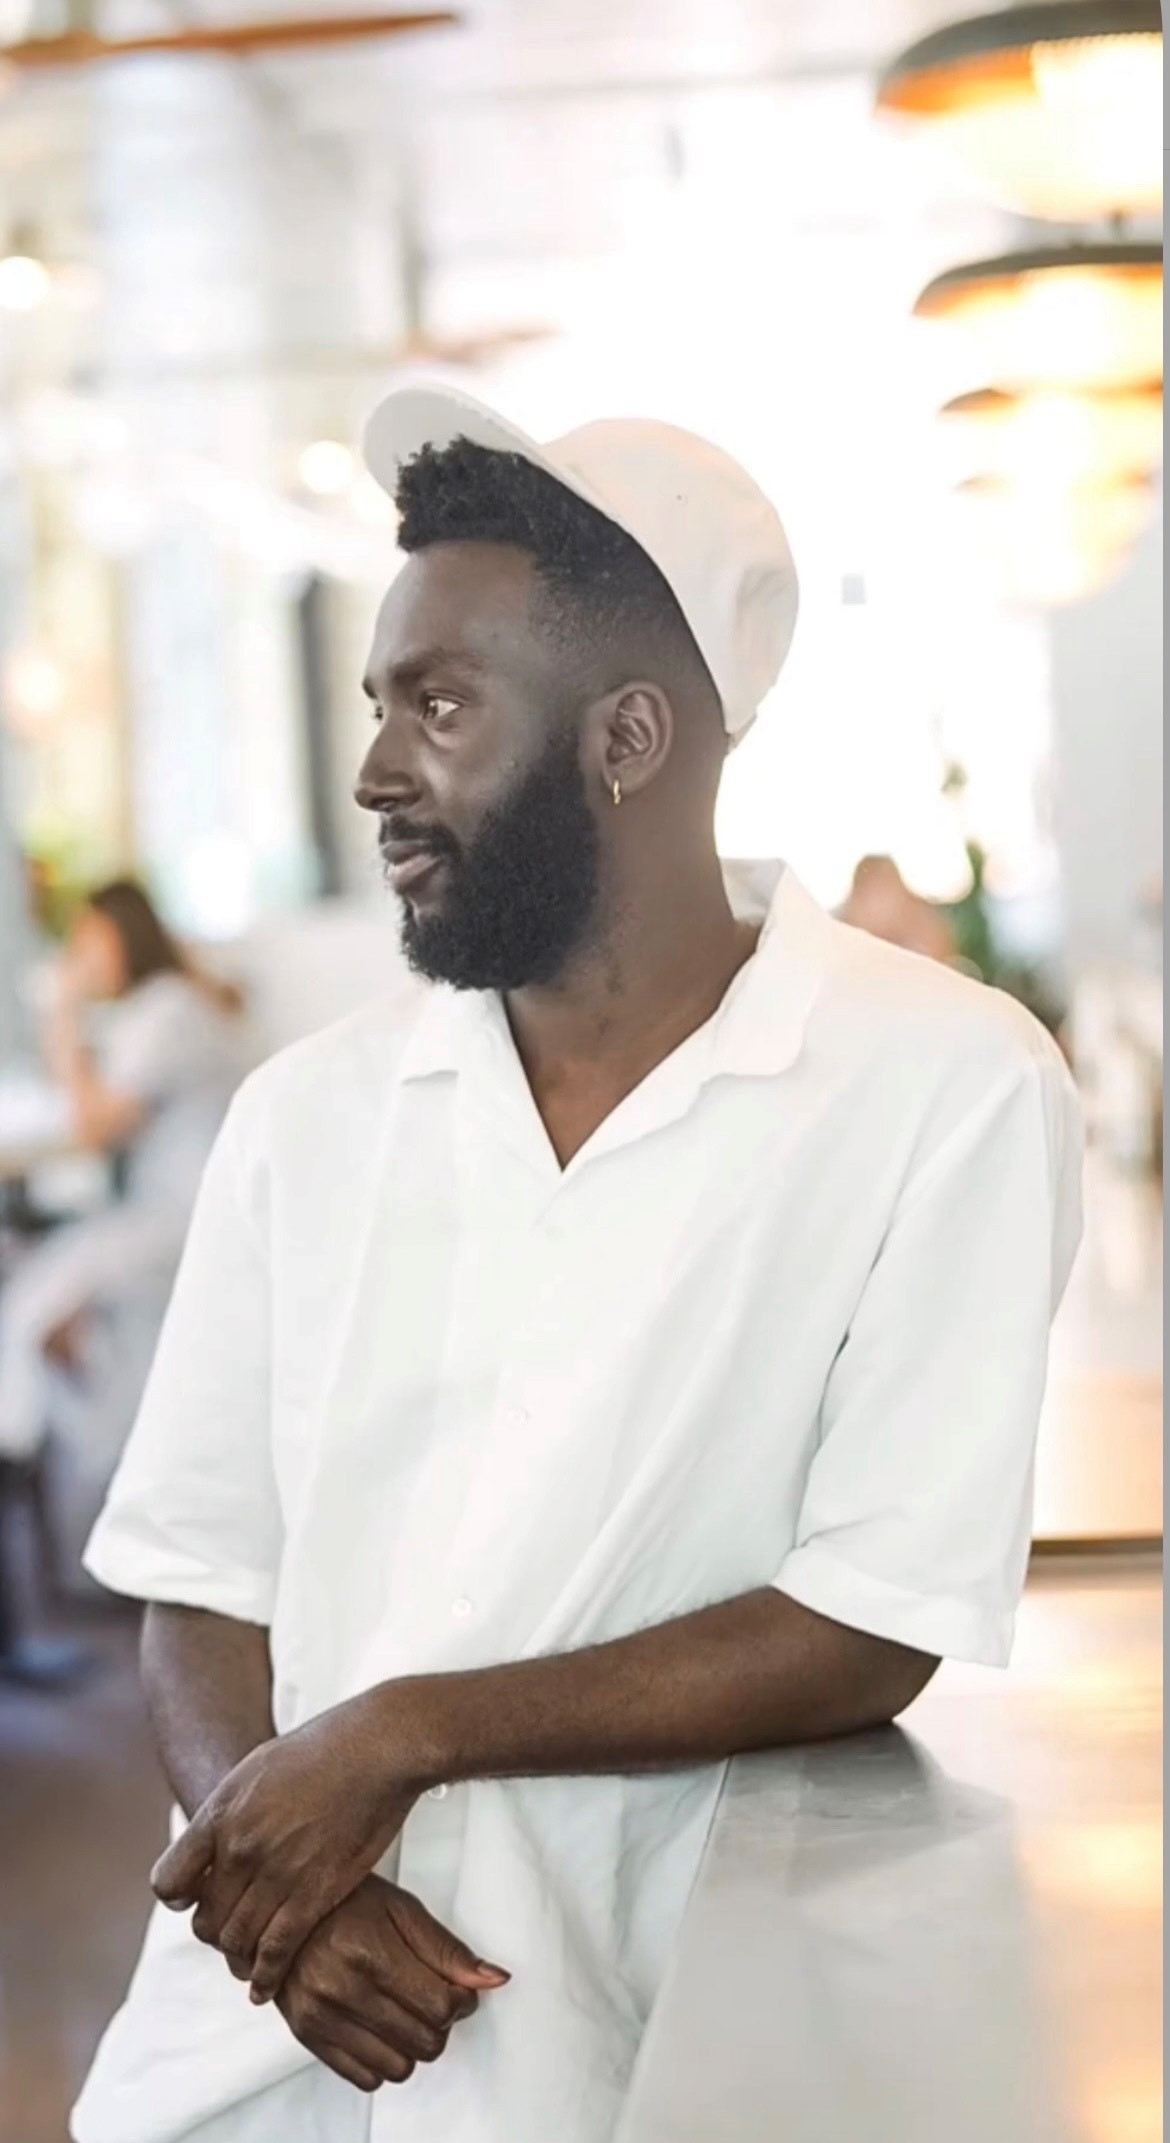 Chris is a young black man, dressed in a crisp white polo shirt with a v-necked collar. Chris has a beard and wears a white cap, which is tilted backwards slightly, to reveal some of his hair. He also wears an earring on his left ear. 